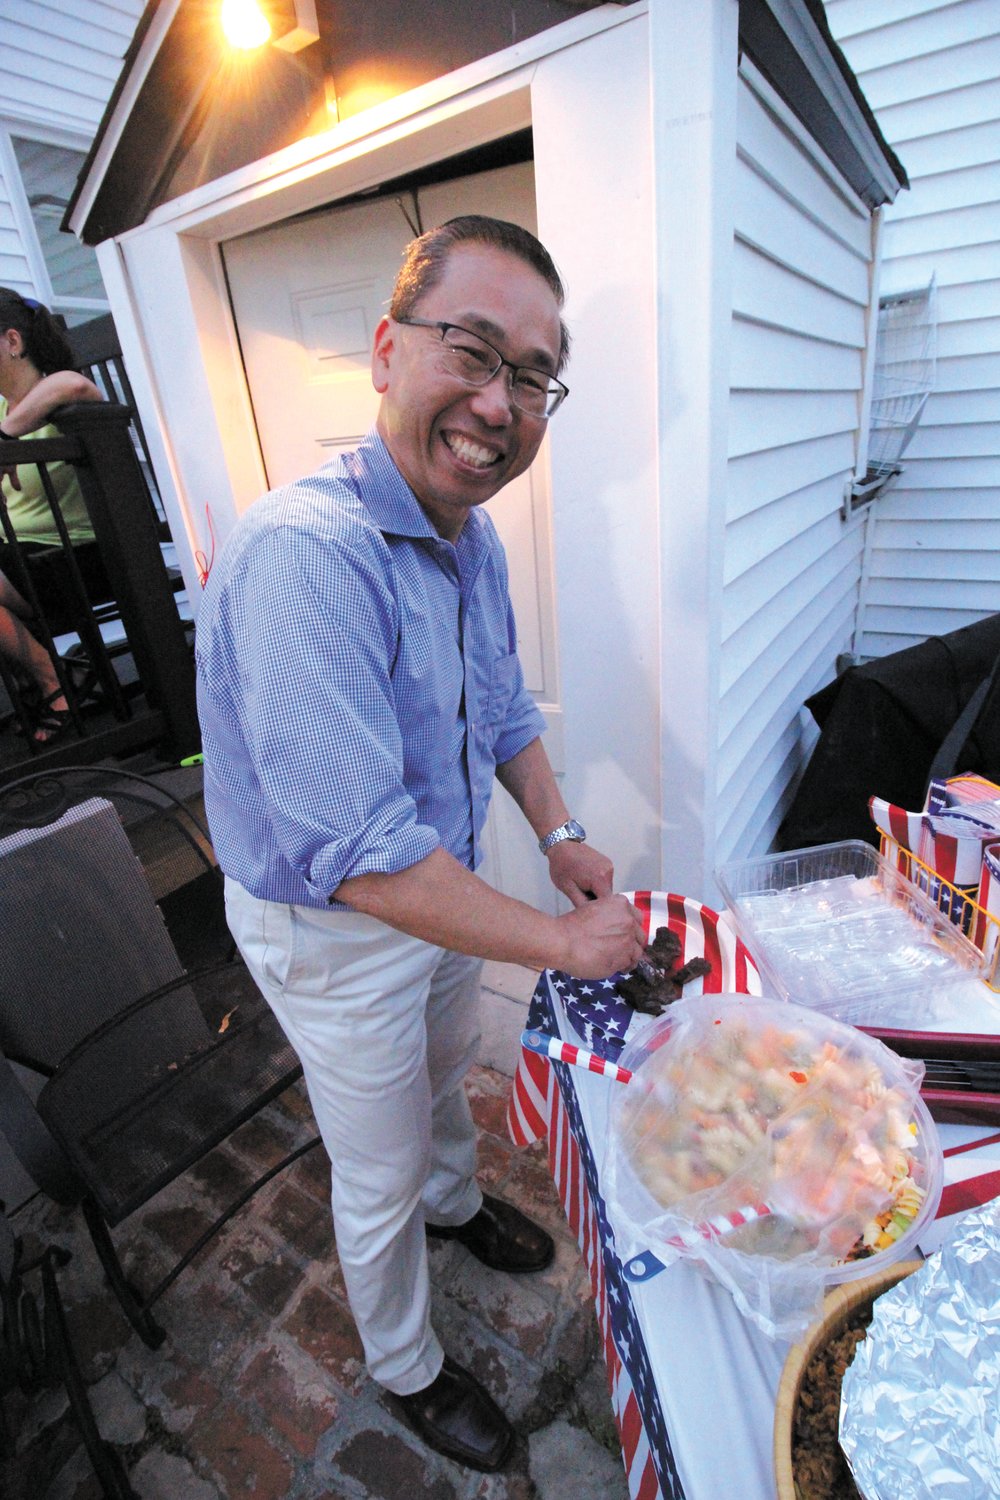 A WELCOME PAUSE: Former Cranston Mayor and CD2 Republican candidate Allan Fung took a break from campaigning Saturday to join the political barbecue. Before going on the airwaves he stopped to enjoy some freshly grilled steak